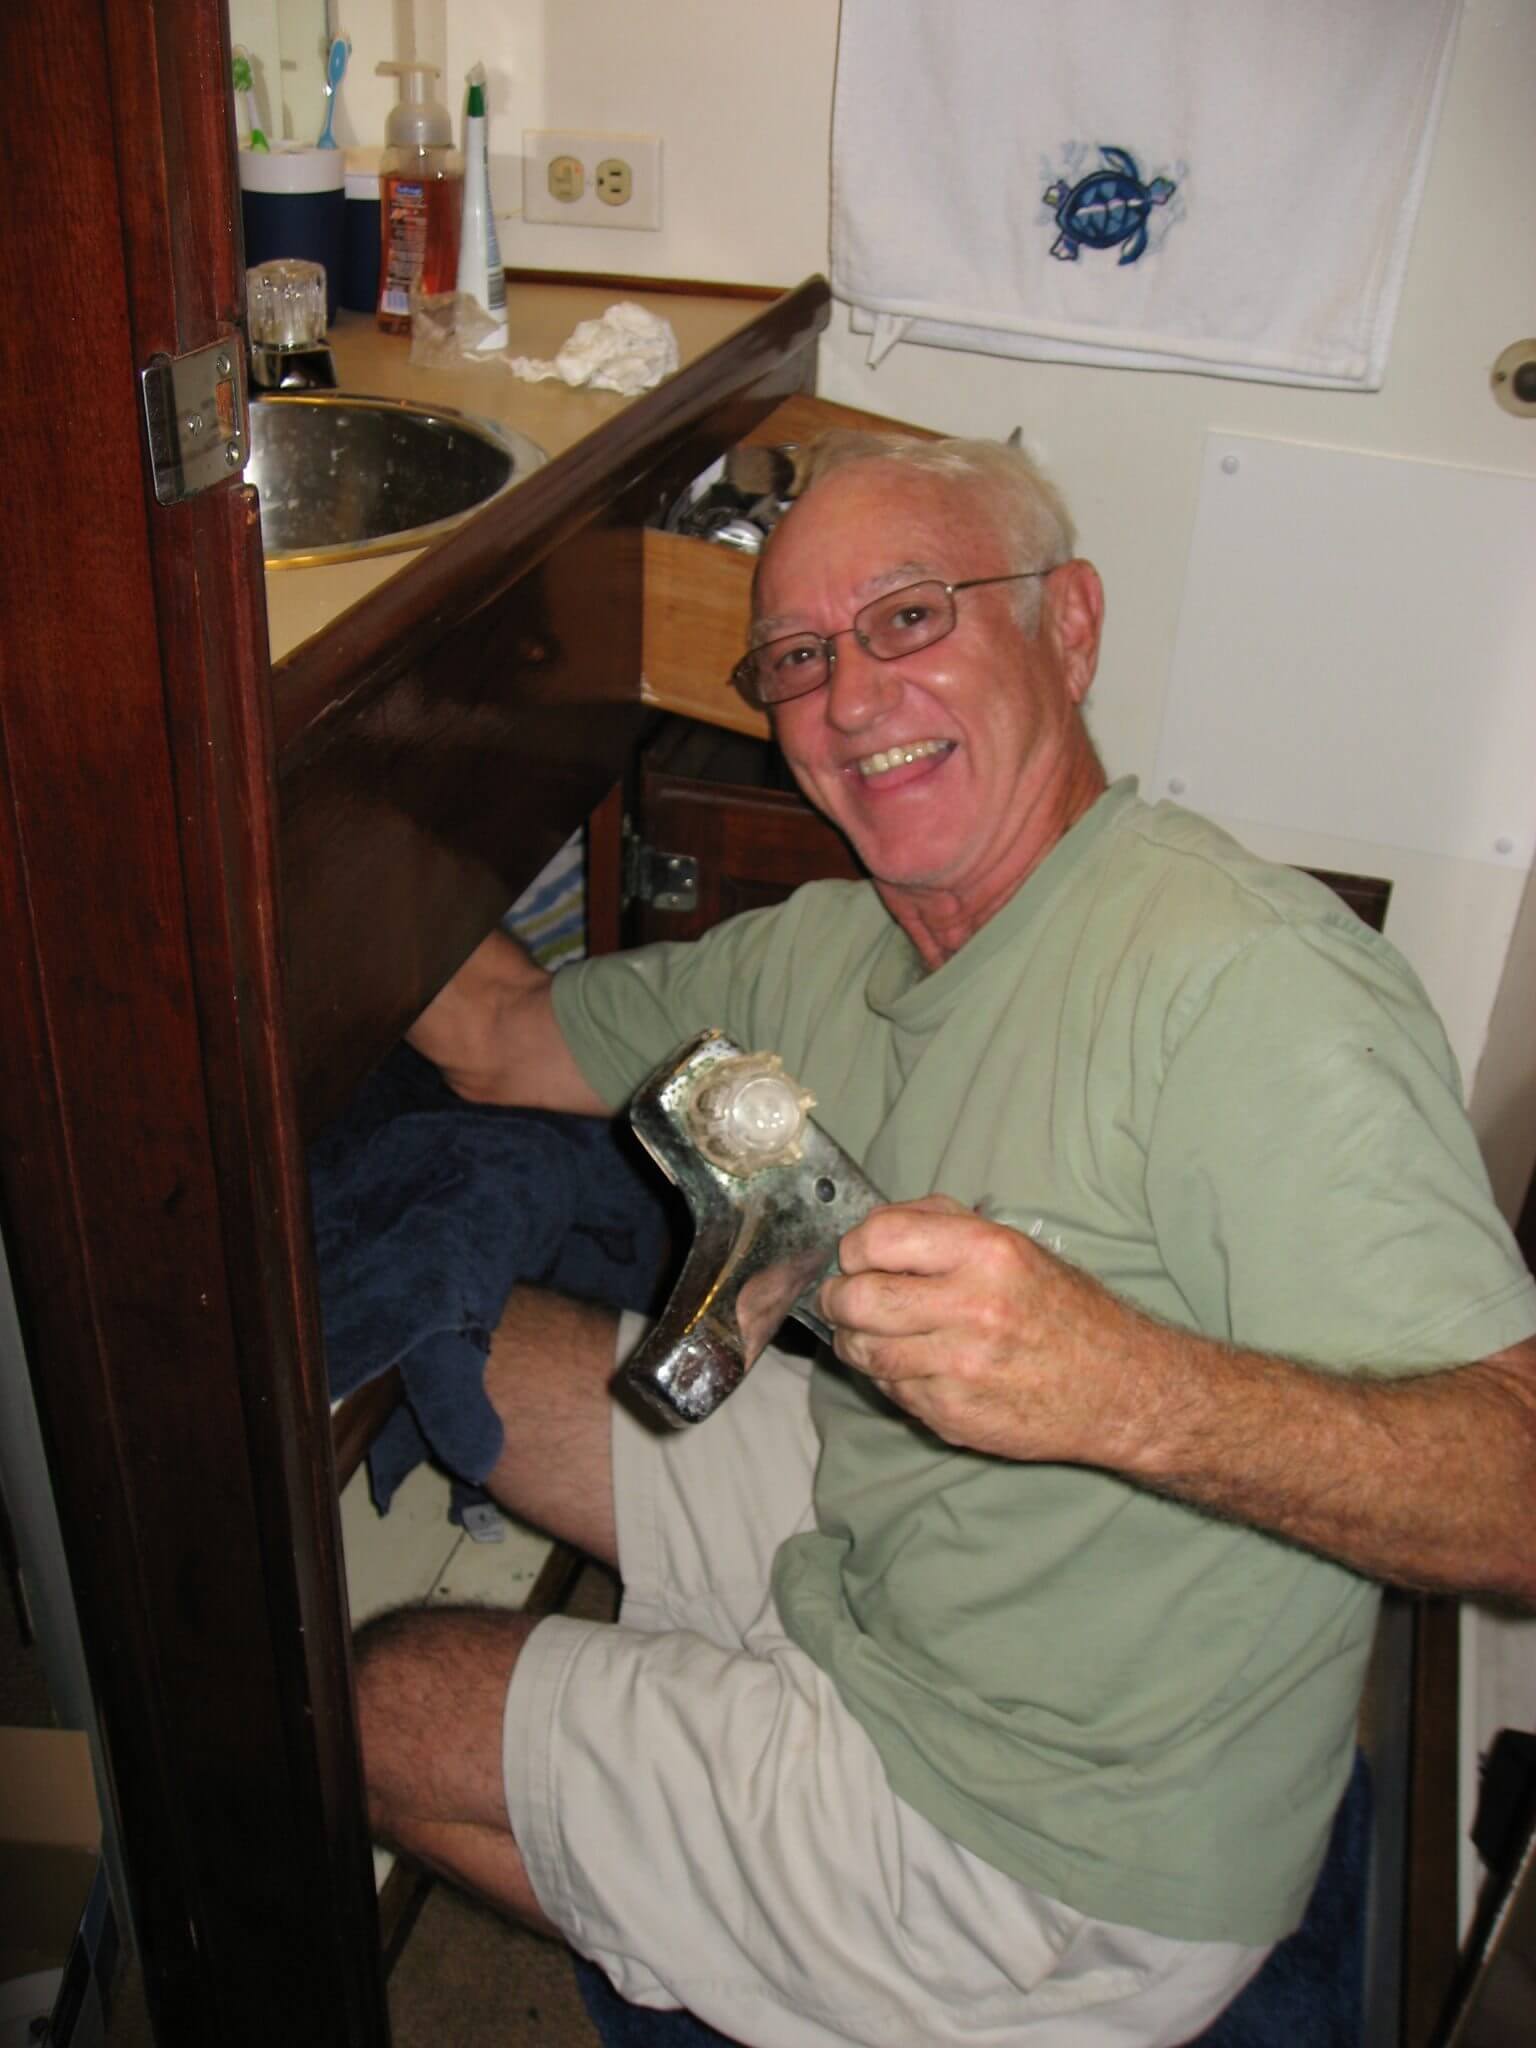 image of John with faucet